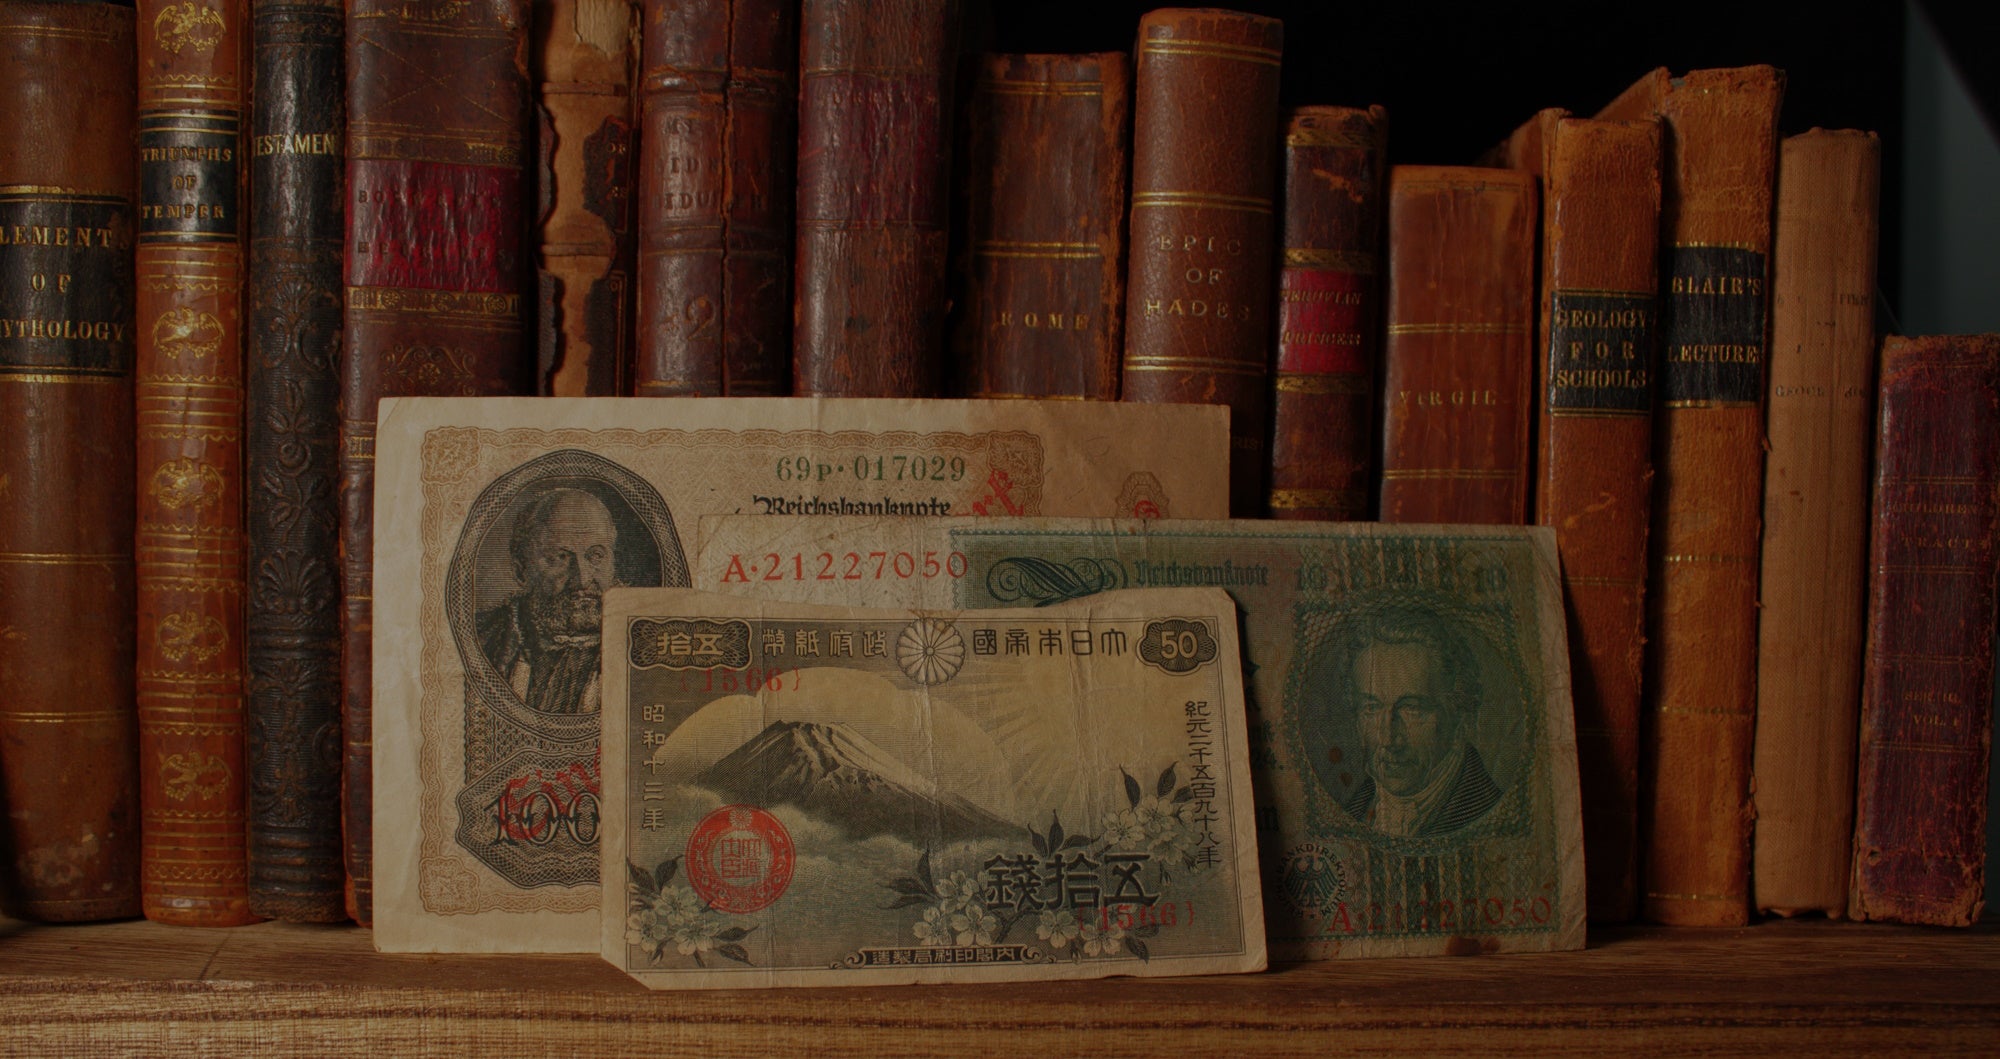 March 22nd Special Offer: Books & Banknotes